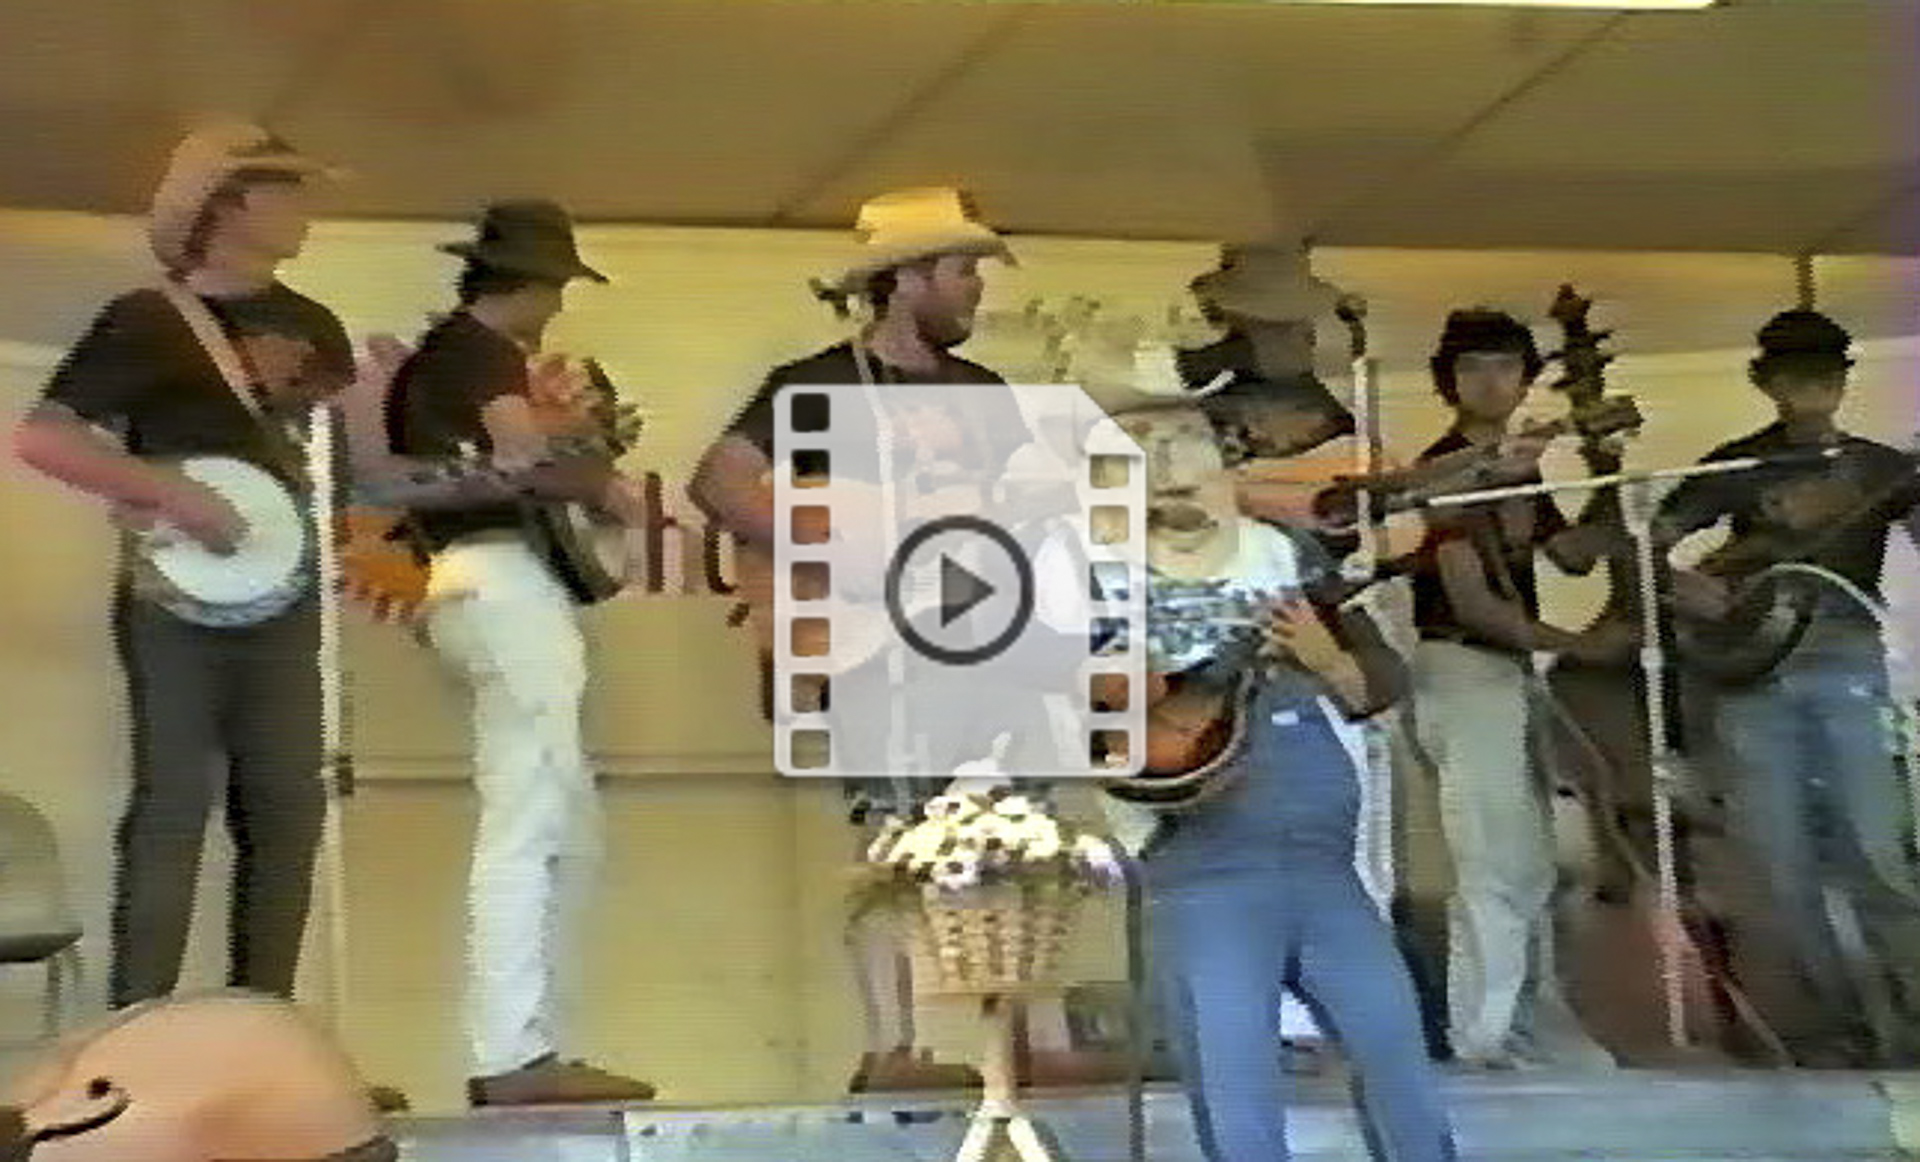 ThomasPt1981 Campsite jam practice and the first ever stage appearance of the Manic Mt. Boys during the dinner break open-mike at the Thomas Pt. Beach Bluegrass Festival 1981. Featuring CFE (Chairman For-Ever) Tom Monahan, Floyd Scholz, Greg Wenzel, Iver Franzen, Dave Zeleznik, Bob Young, Todd Macalister (spelled wrong in video), Jamie Peghiny, Paul Wolf, the mystery bones player, and of course Elmer!